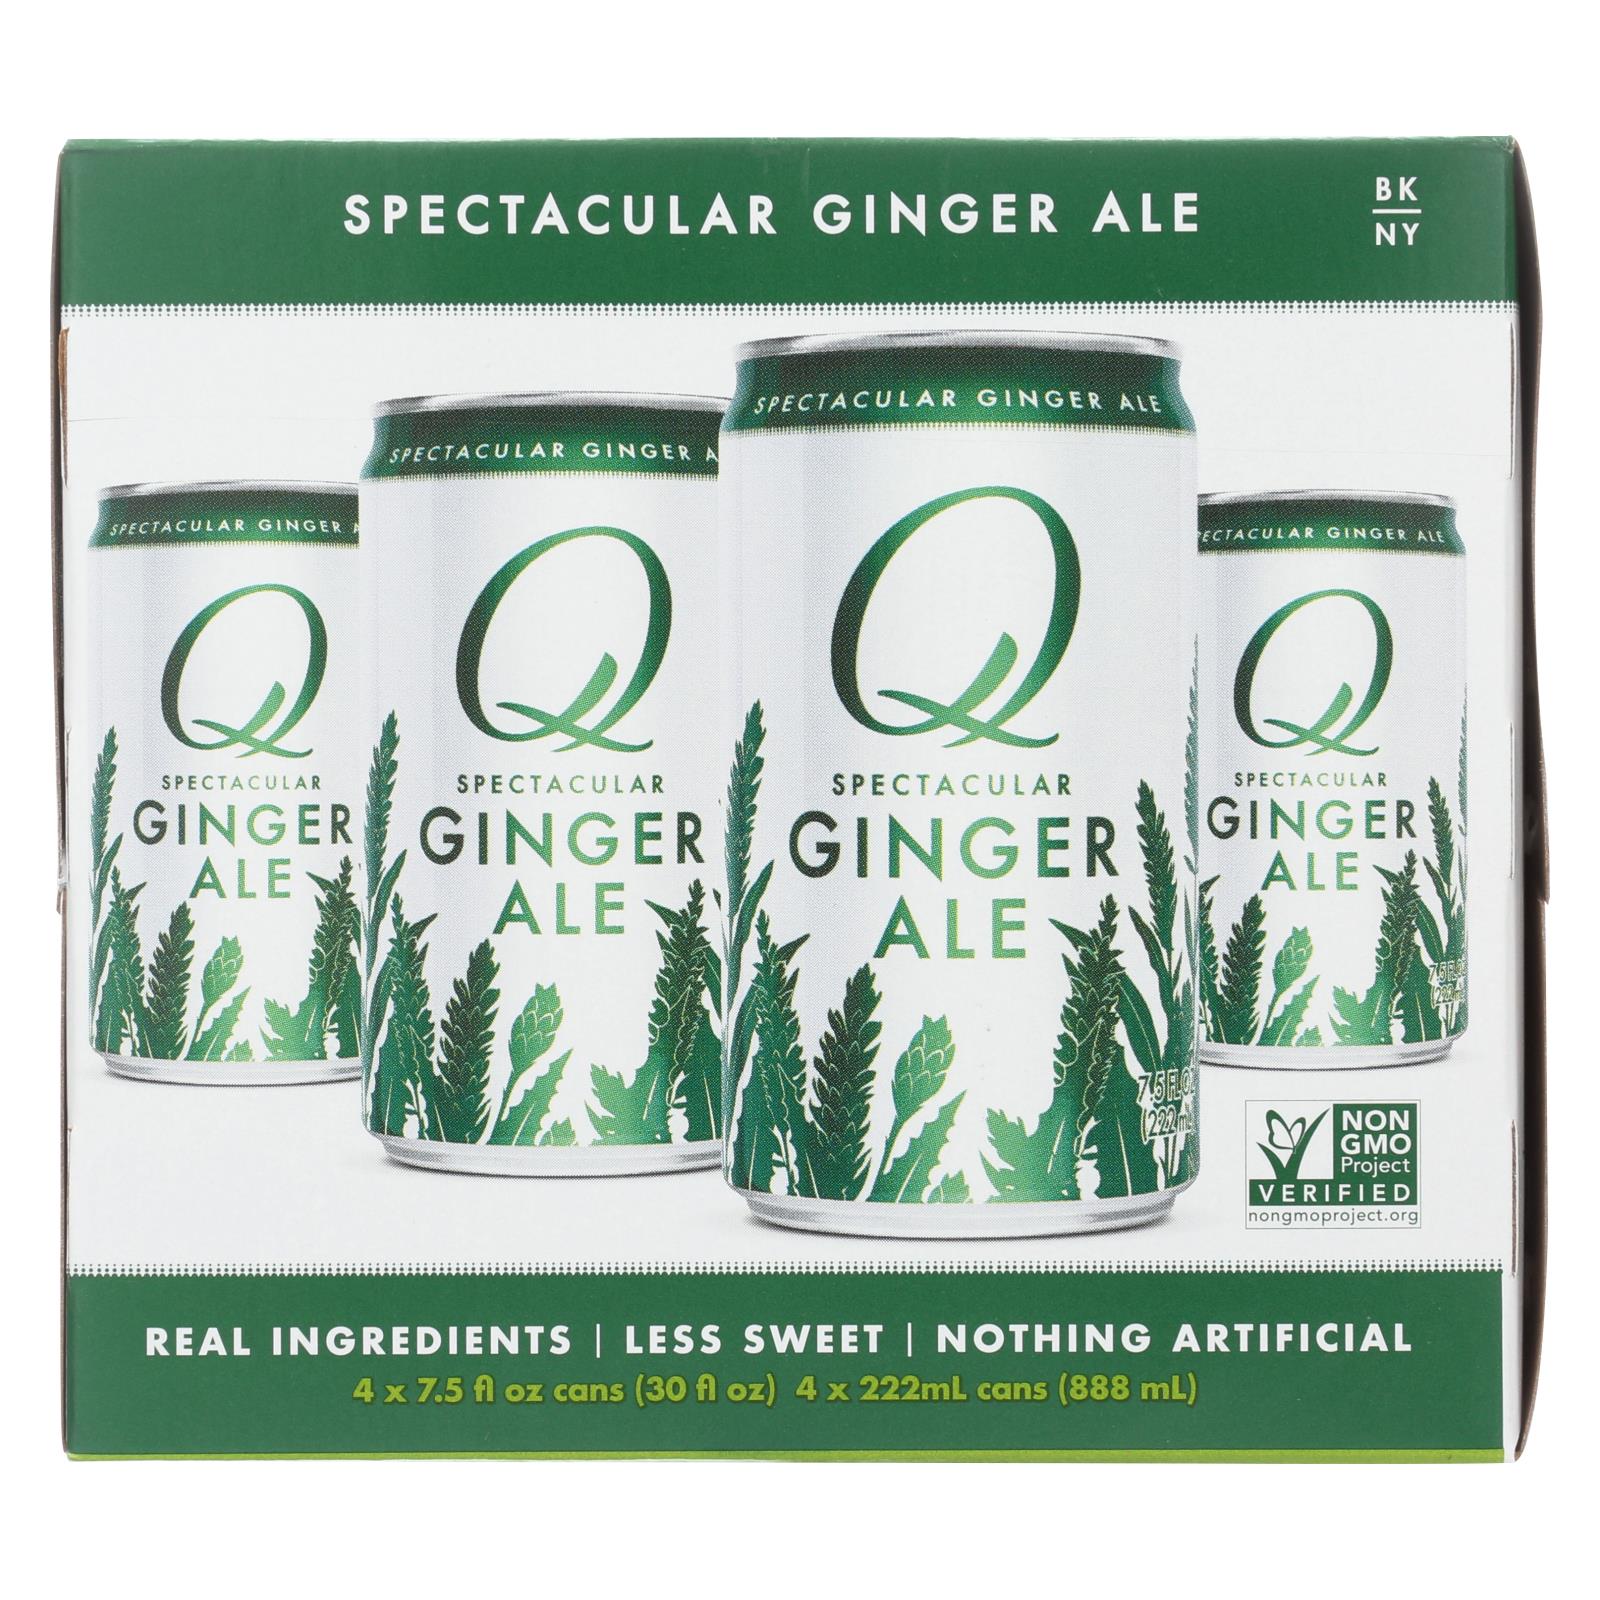 Q Drinks - Ginger Ale - 6개 묶음상품/4 packs/7.5oz Cans